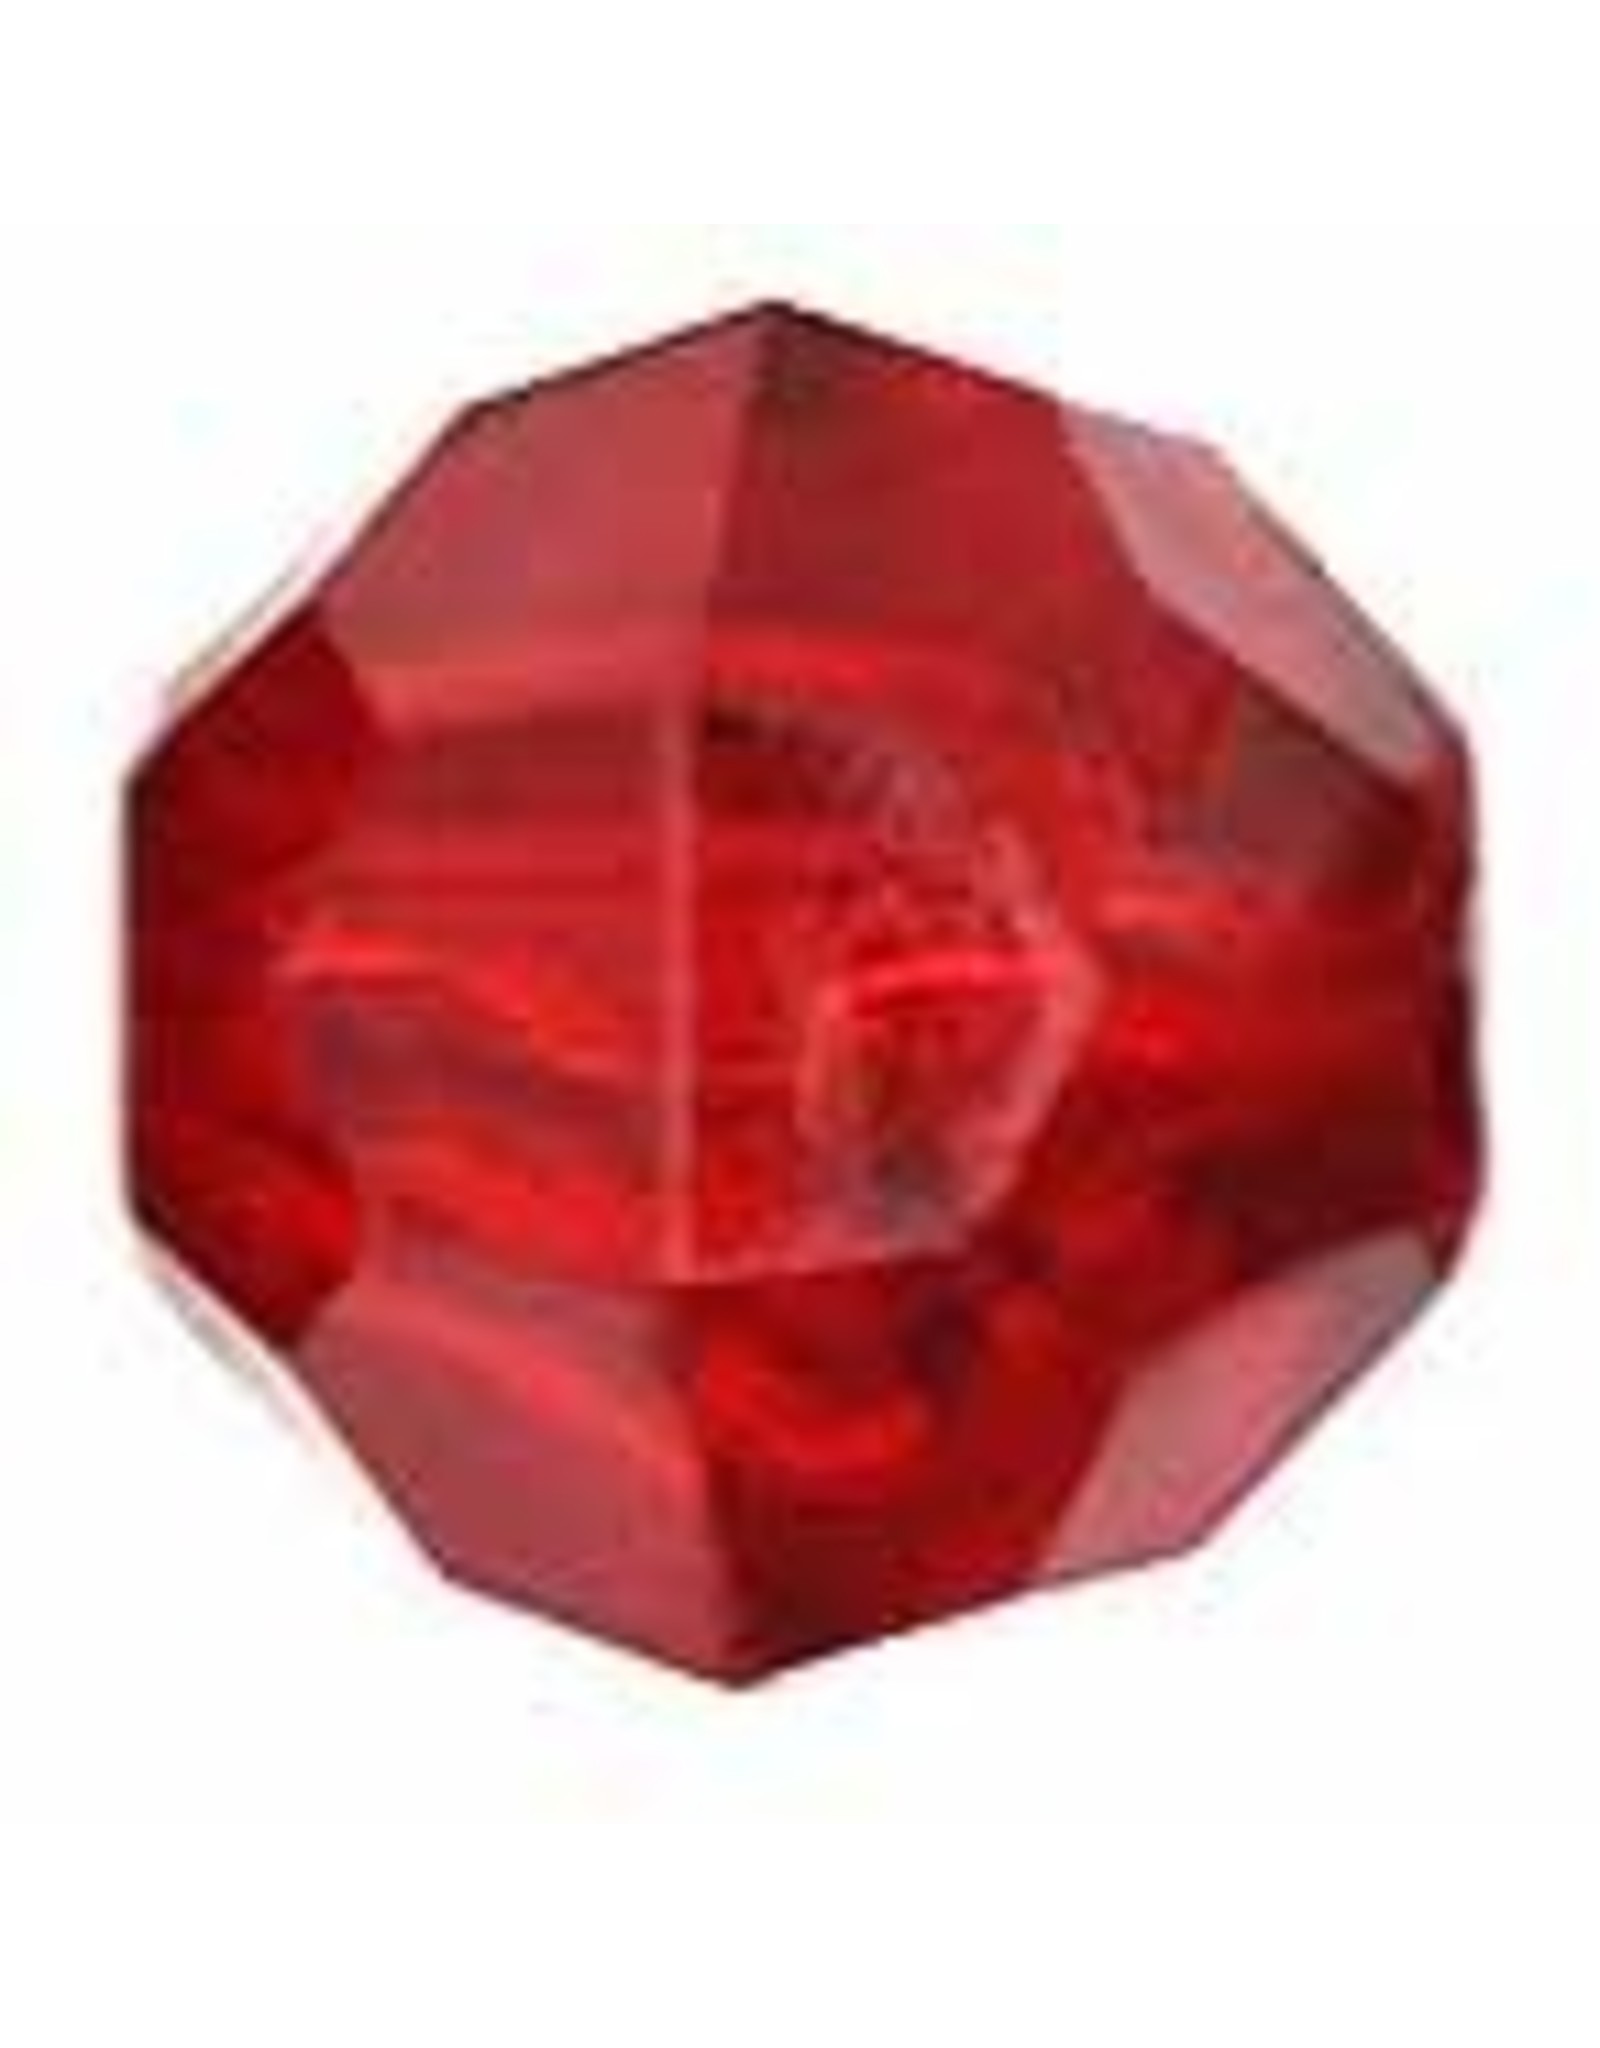 Faceted Round  8mm Transparent Ruby Red   x250